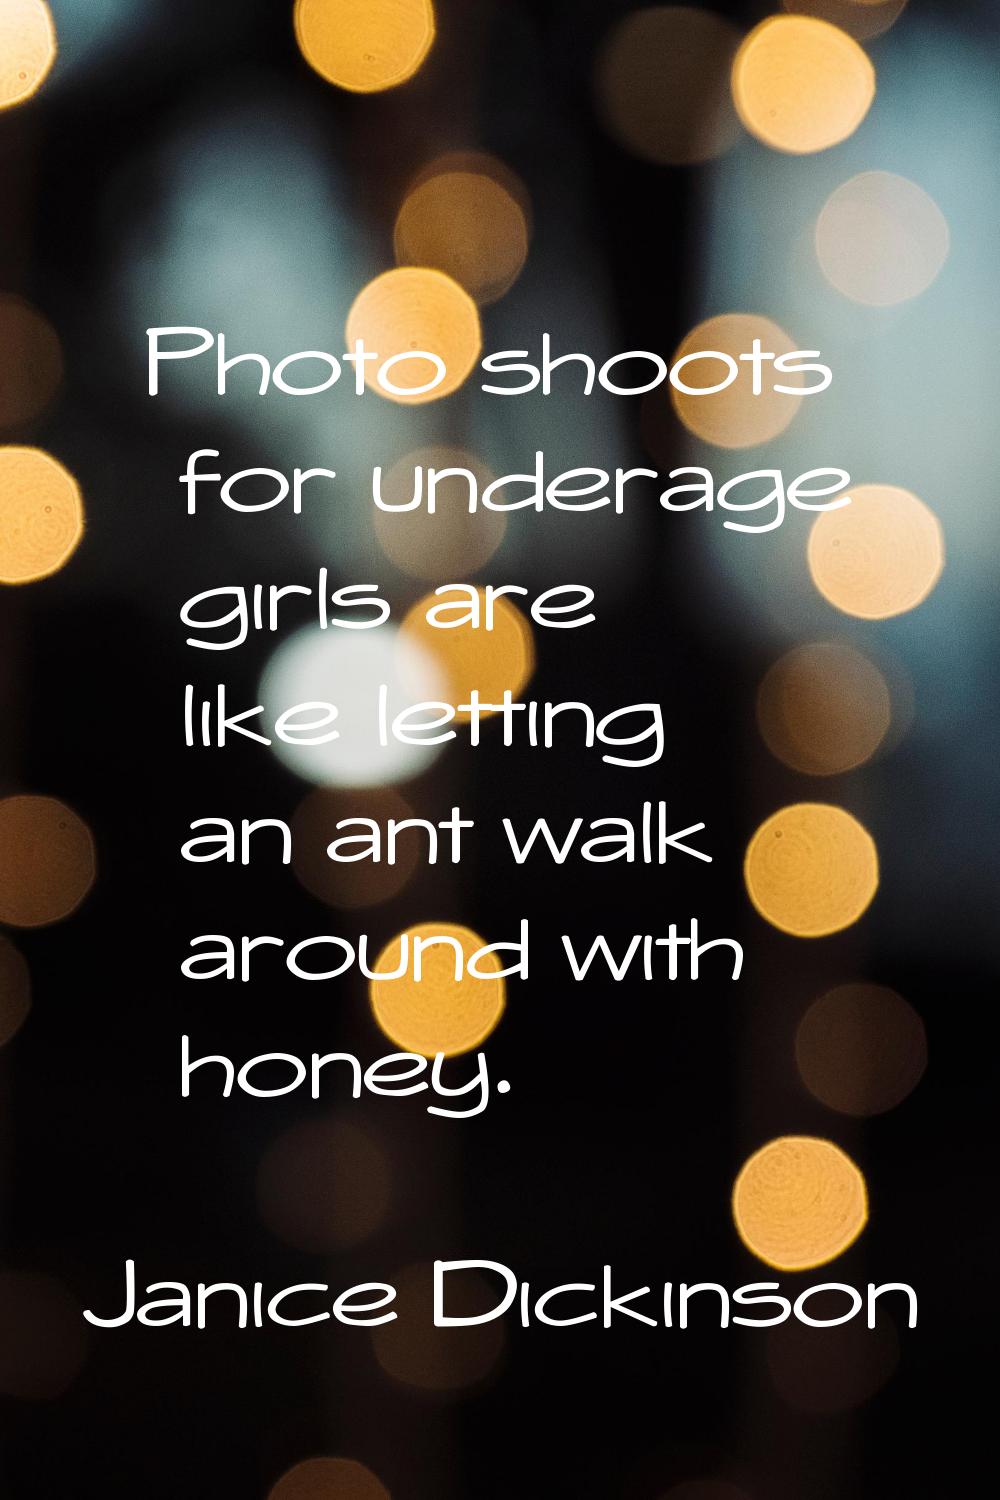 Photo shoots for underage girls are like letting an ant walk around with honey.